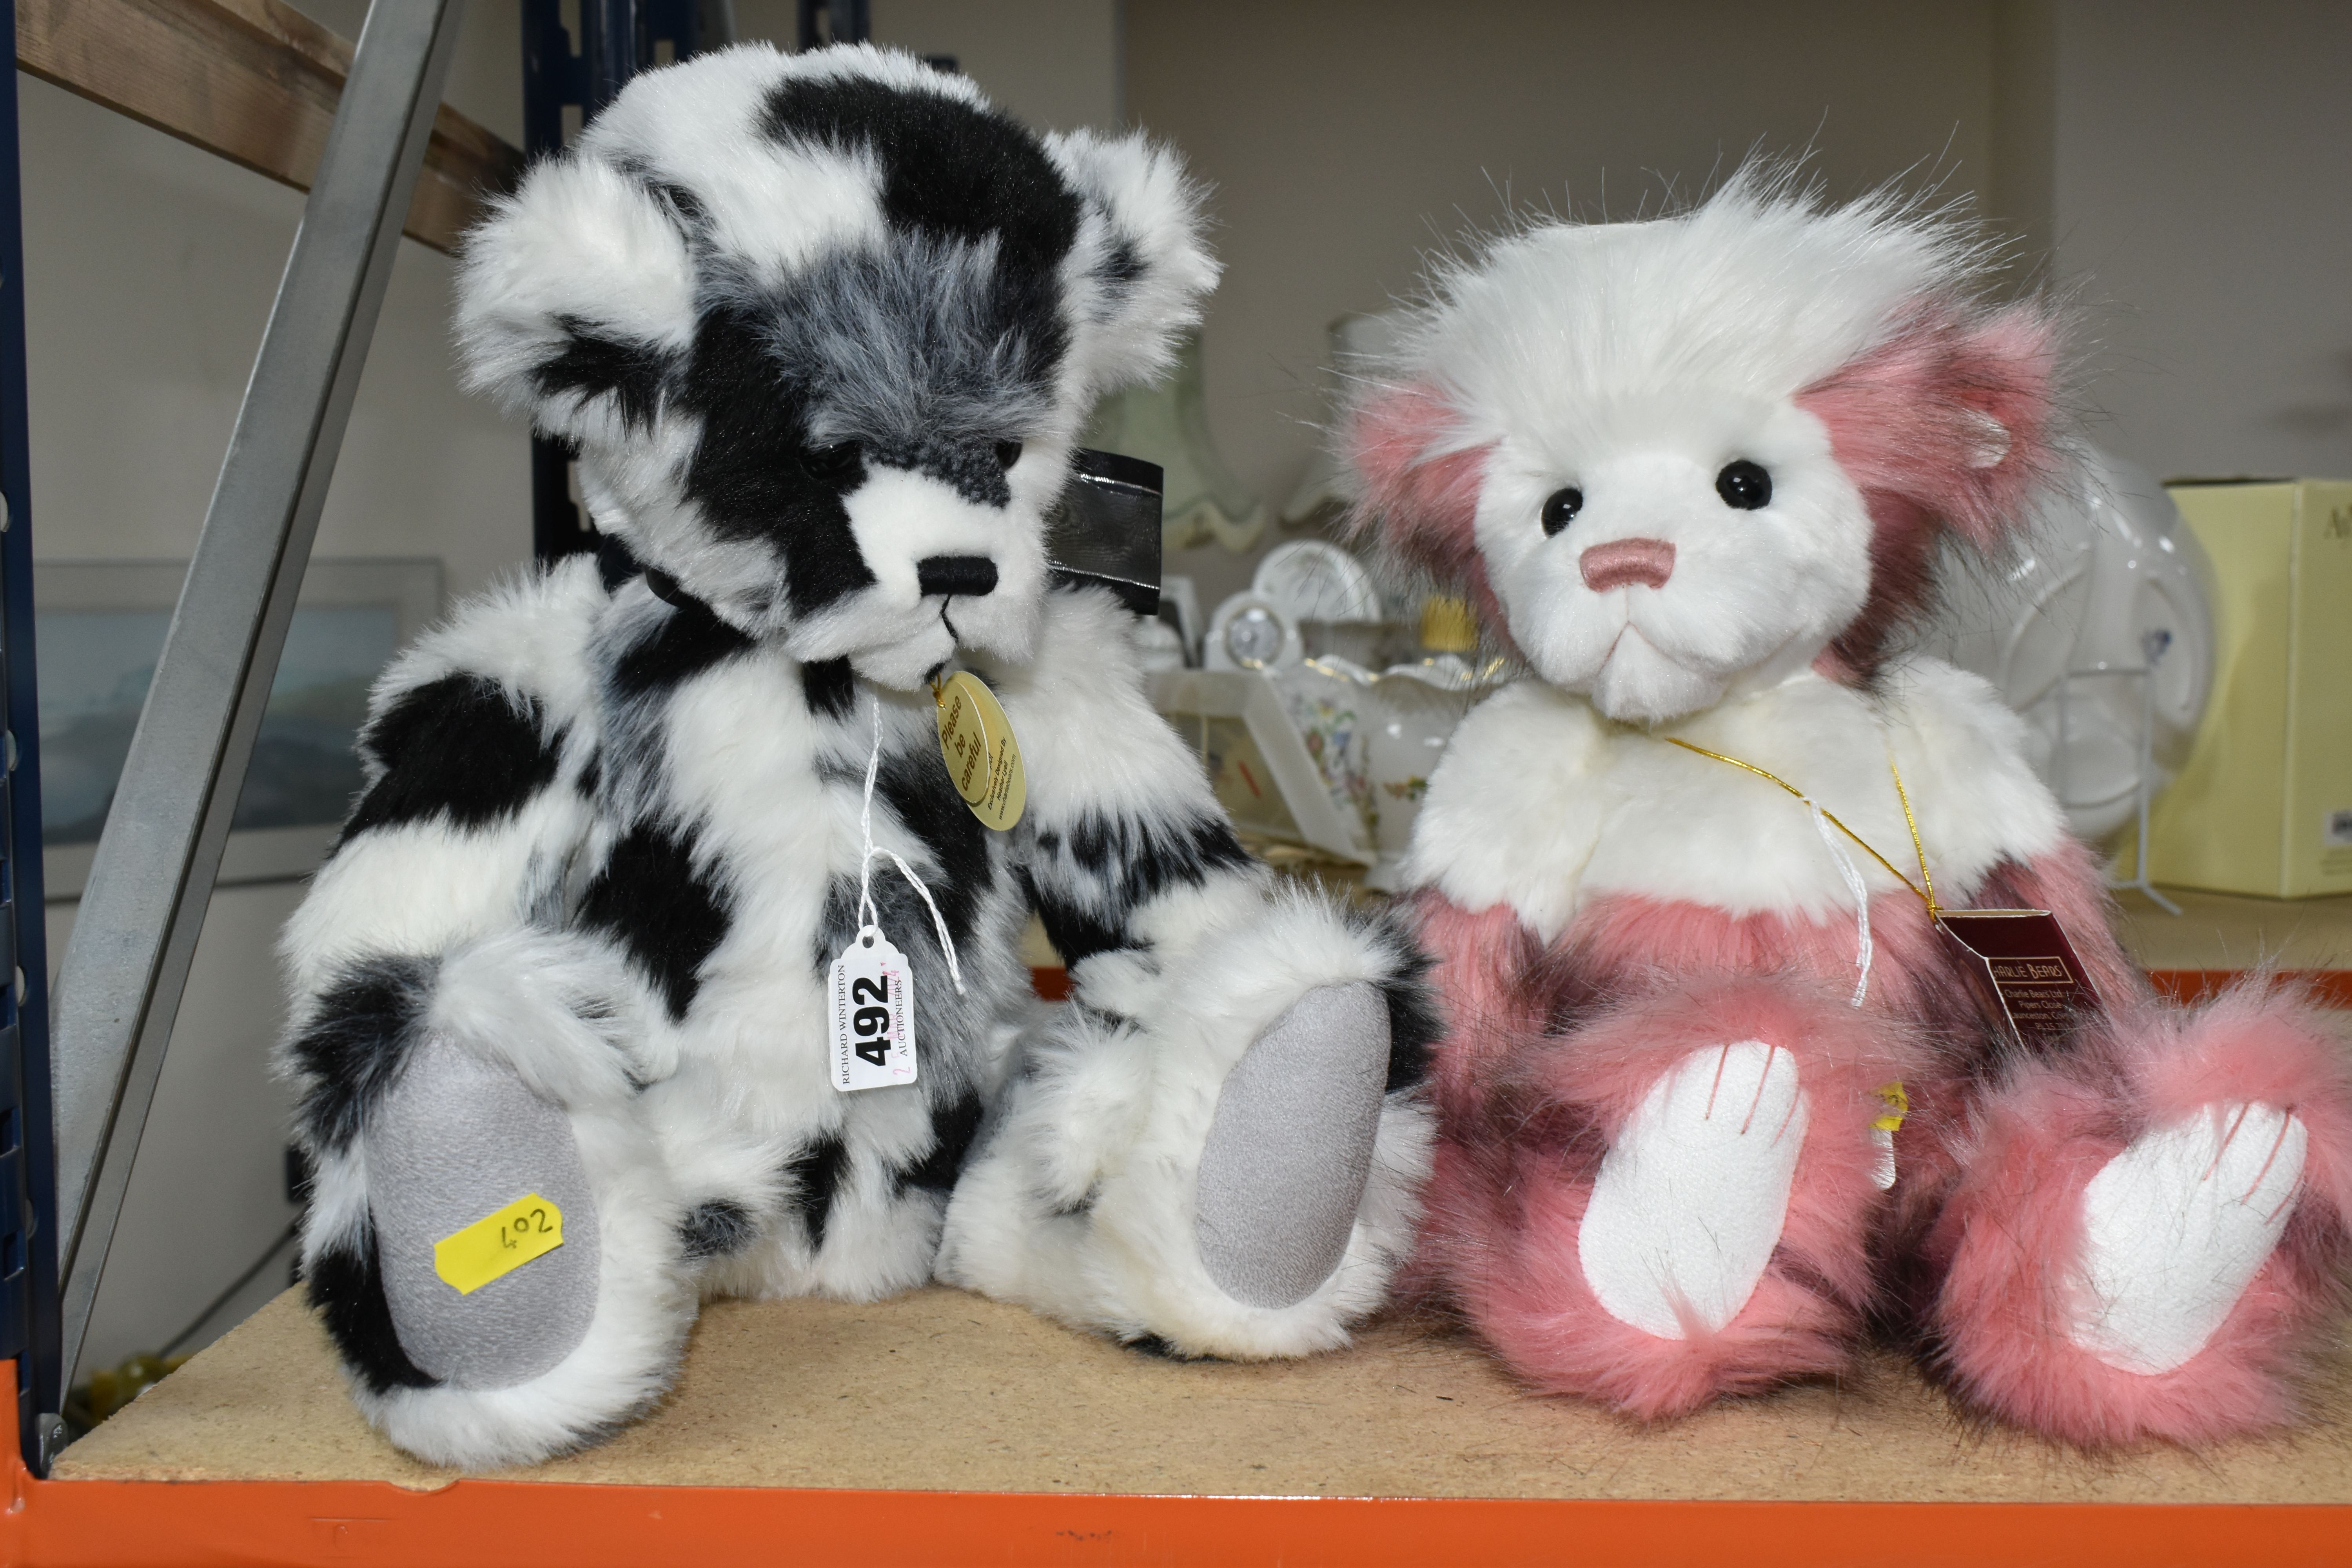 TWO CHARLIE BEARS, comprising 'Coconut Ice' CB1500120 and 'Inkspot' CB620009 both designed by